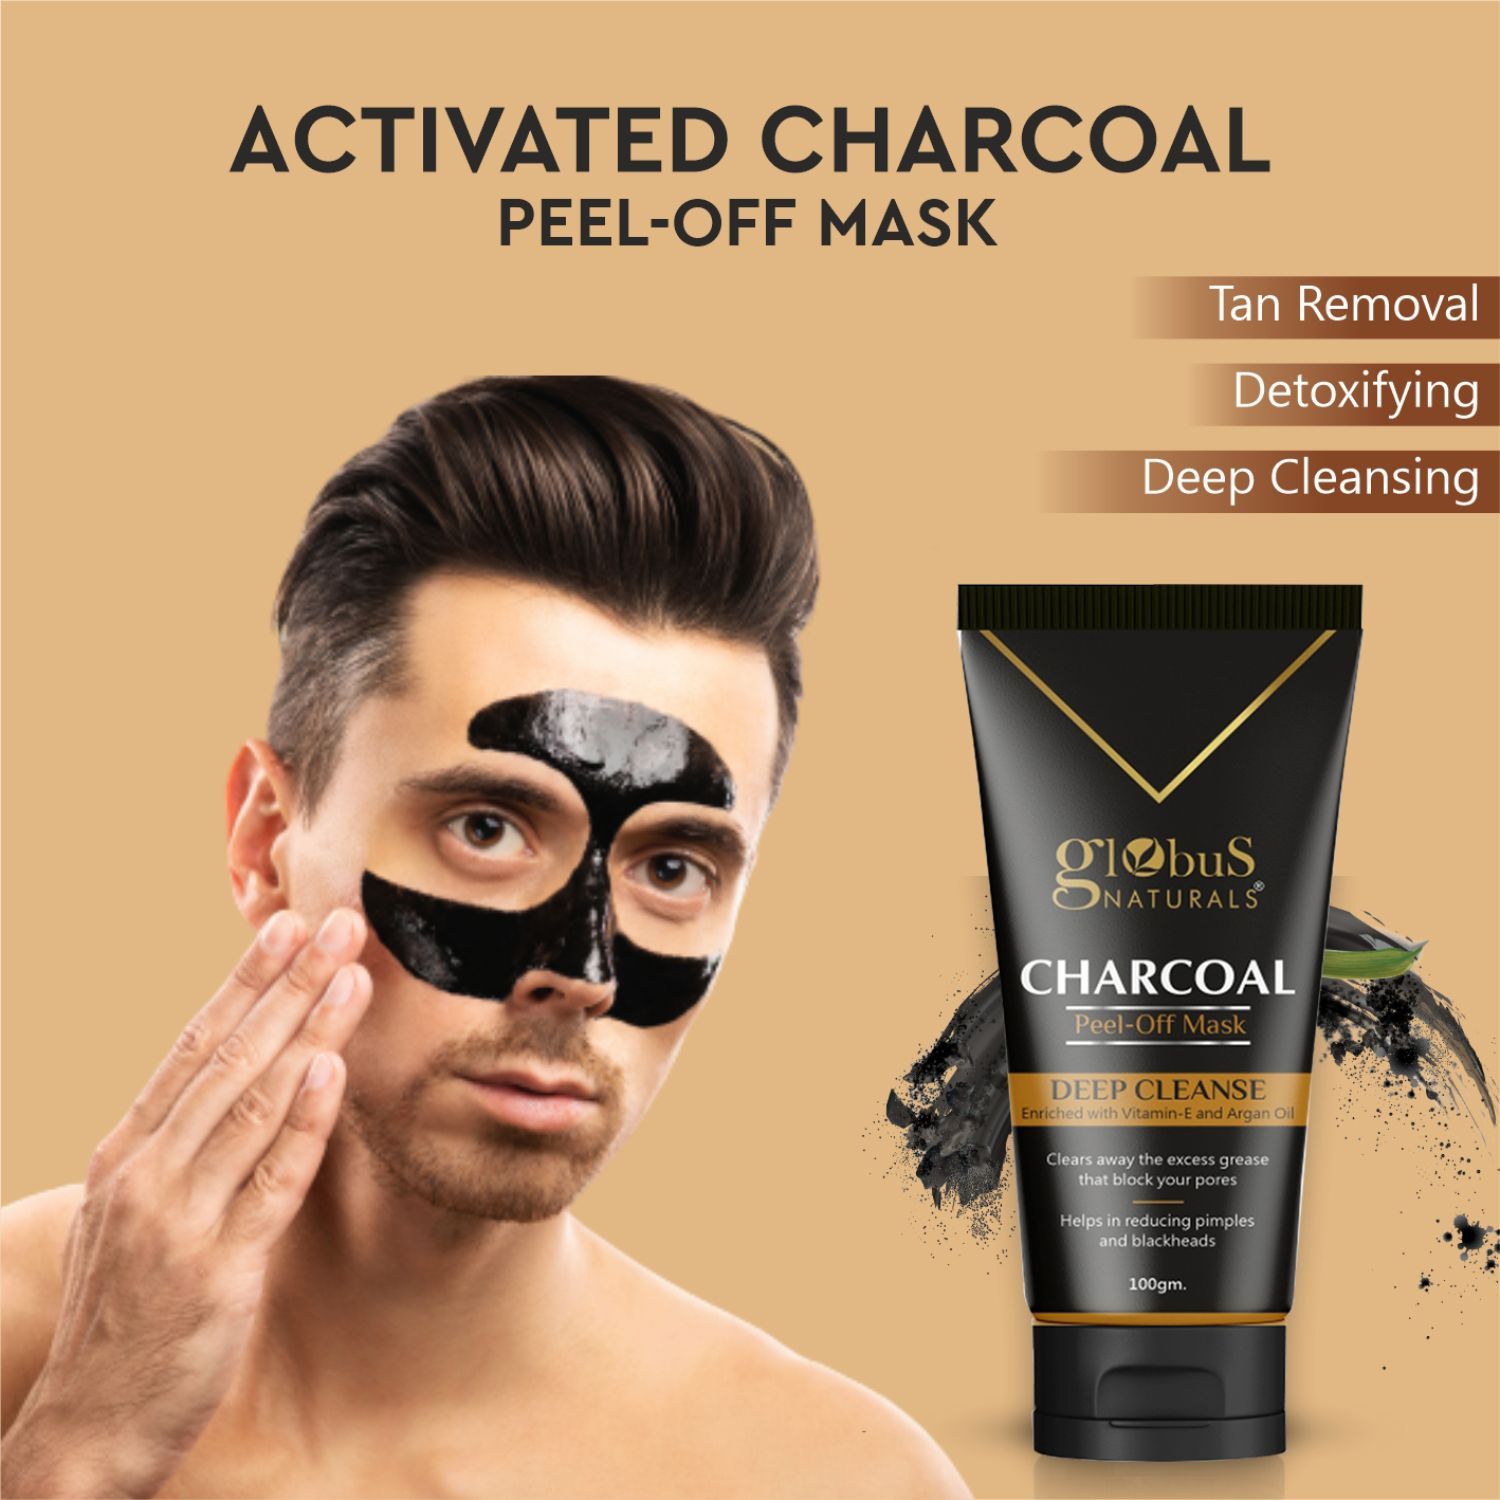 Buy Globus Naturals Anti Pollution & Anti Acne Charcoal Peel Off Mask, Detoxifying Face mask, Fights Pollution and De-Tans skin, For Men with Oily & Acne Prone Skin, 100 gms - Purplle